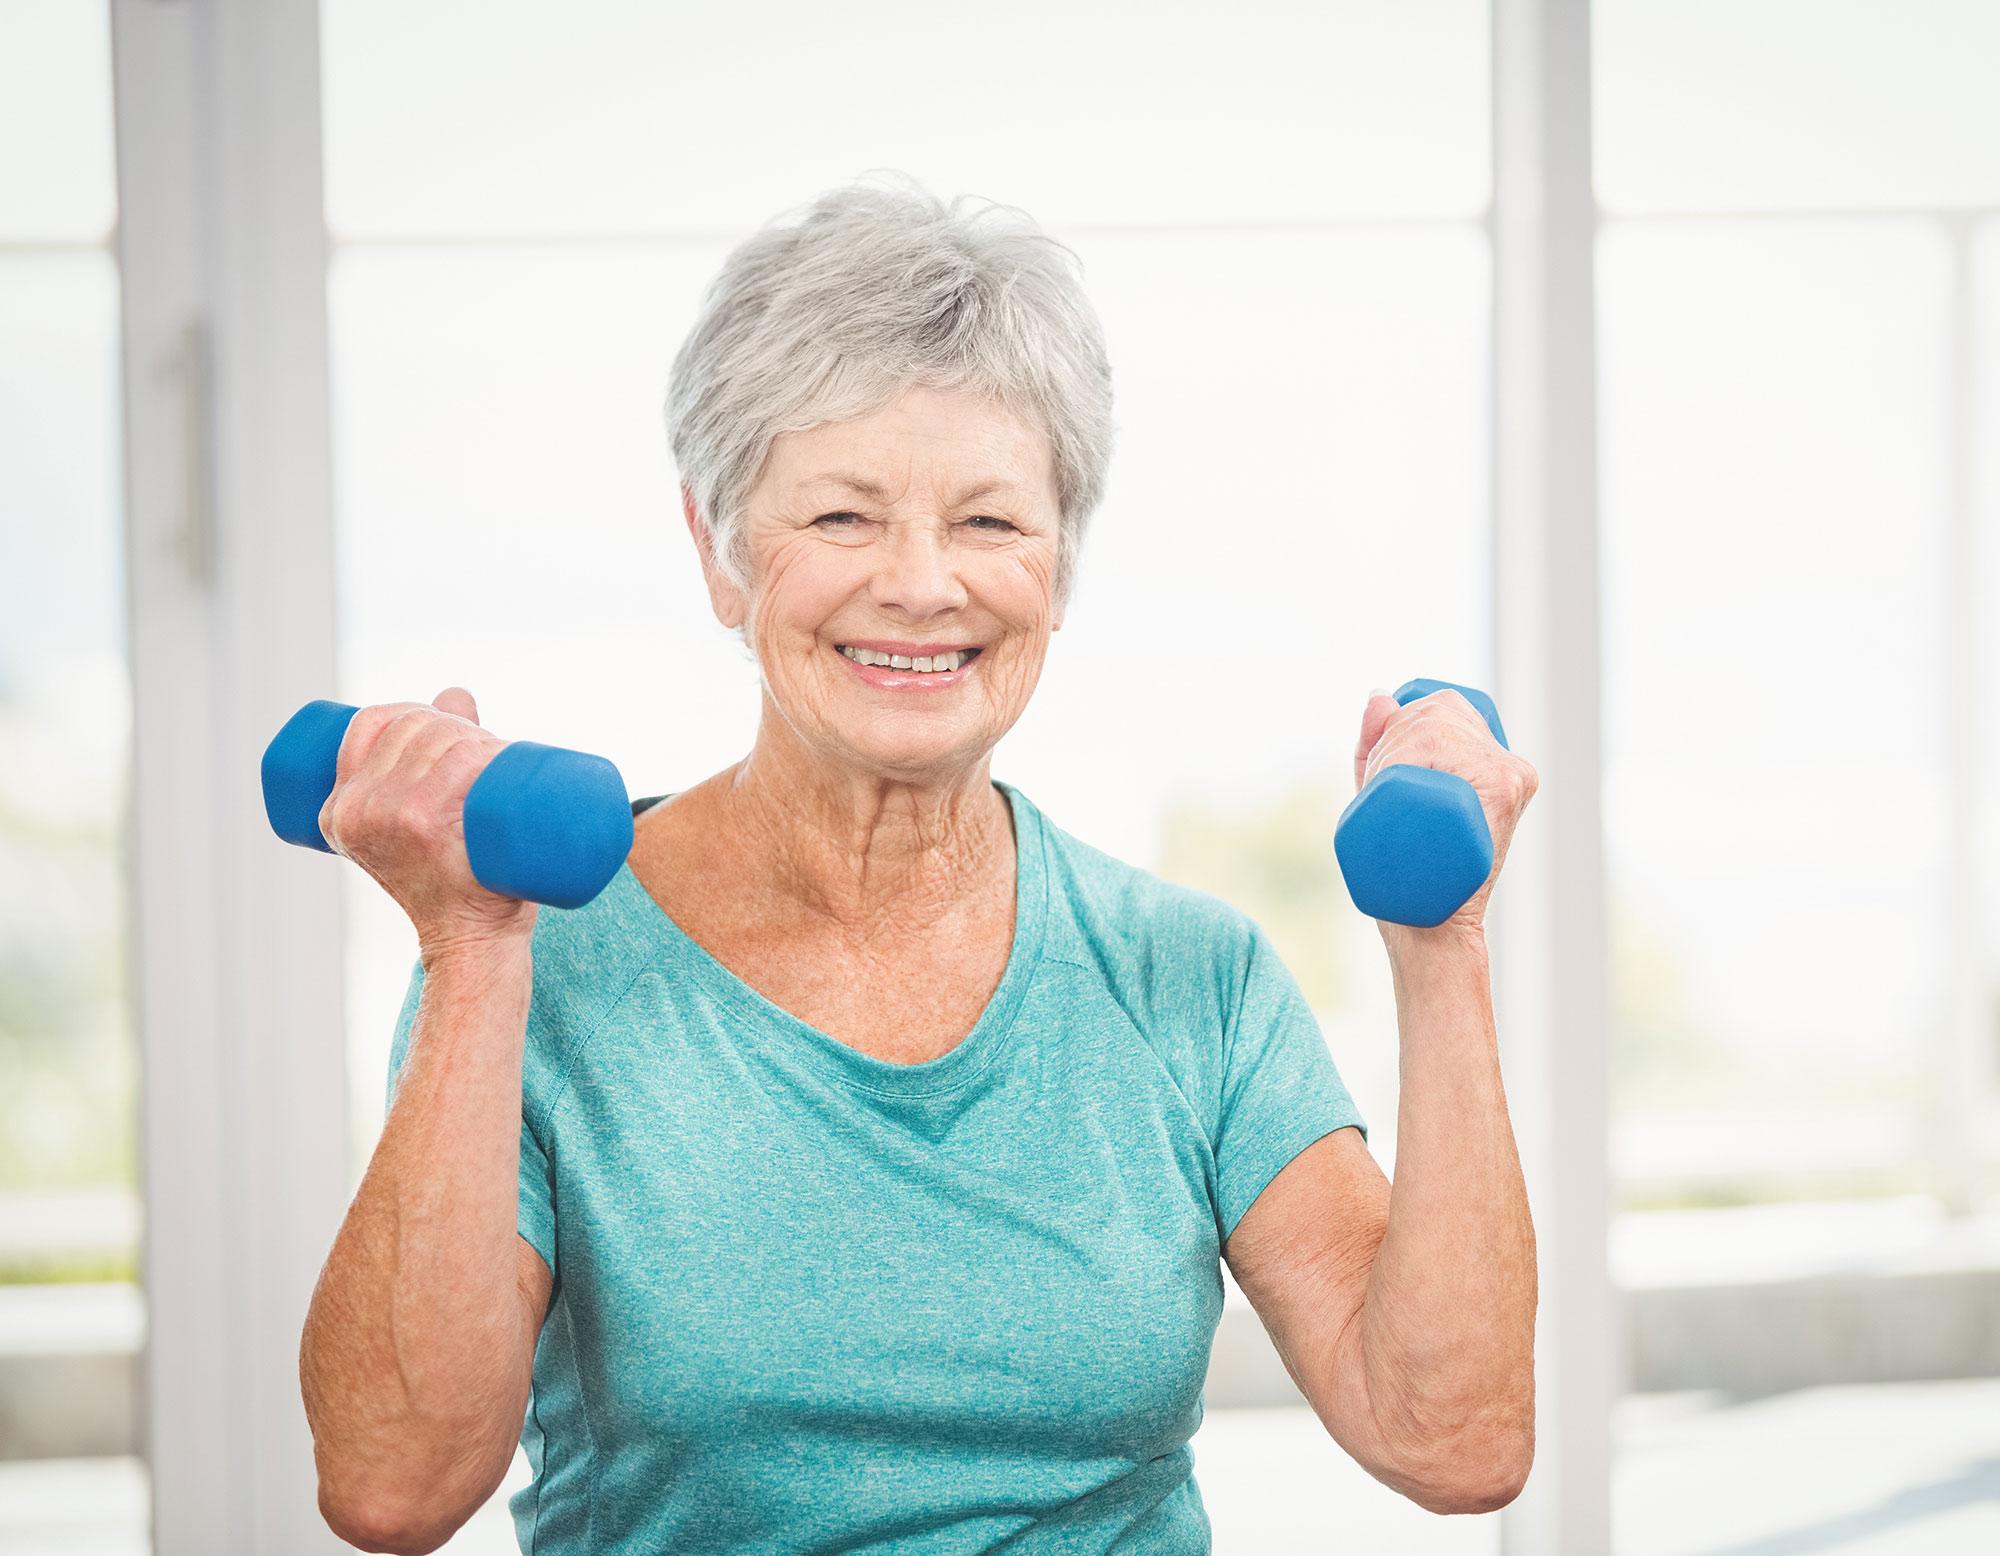 P J130 Exercise Treatment Program Stock Image Woman With Weights Web